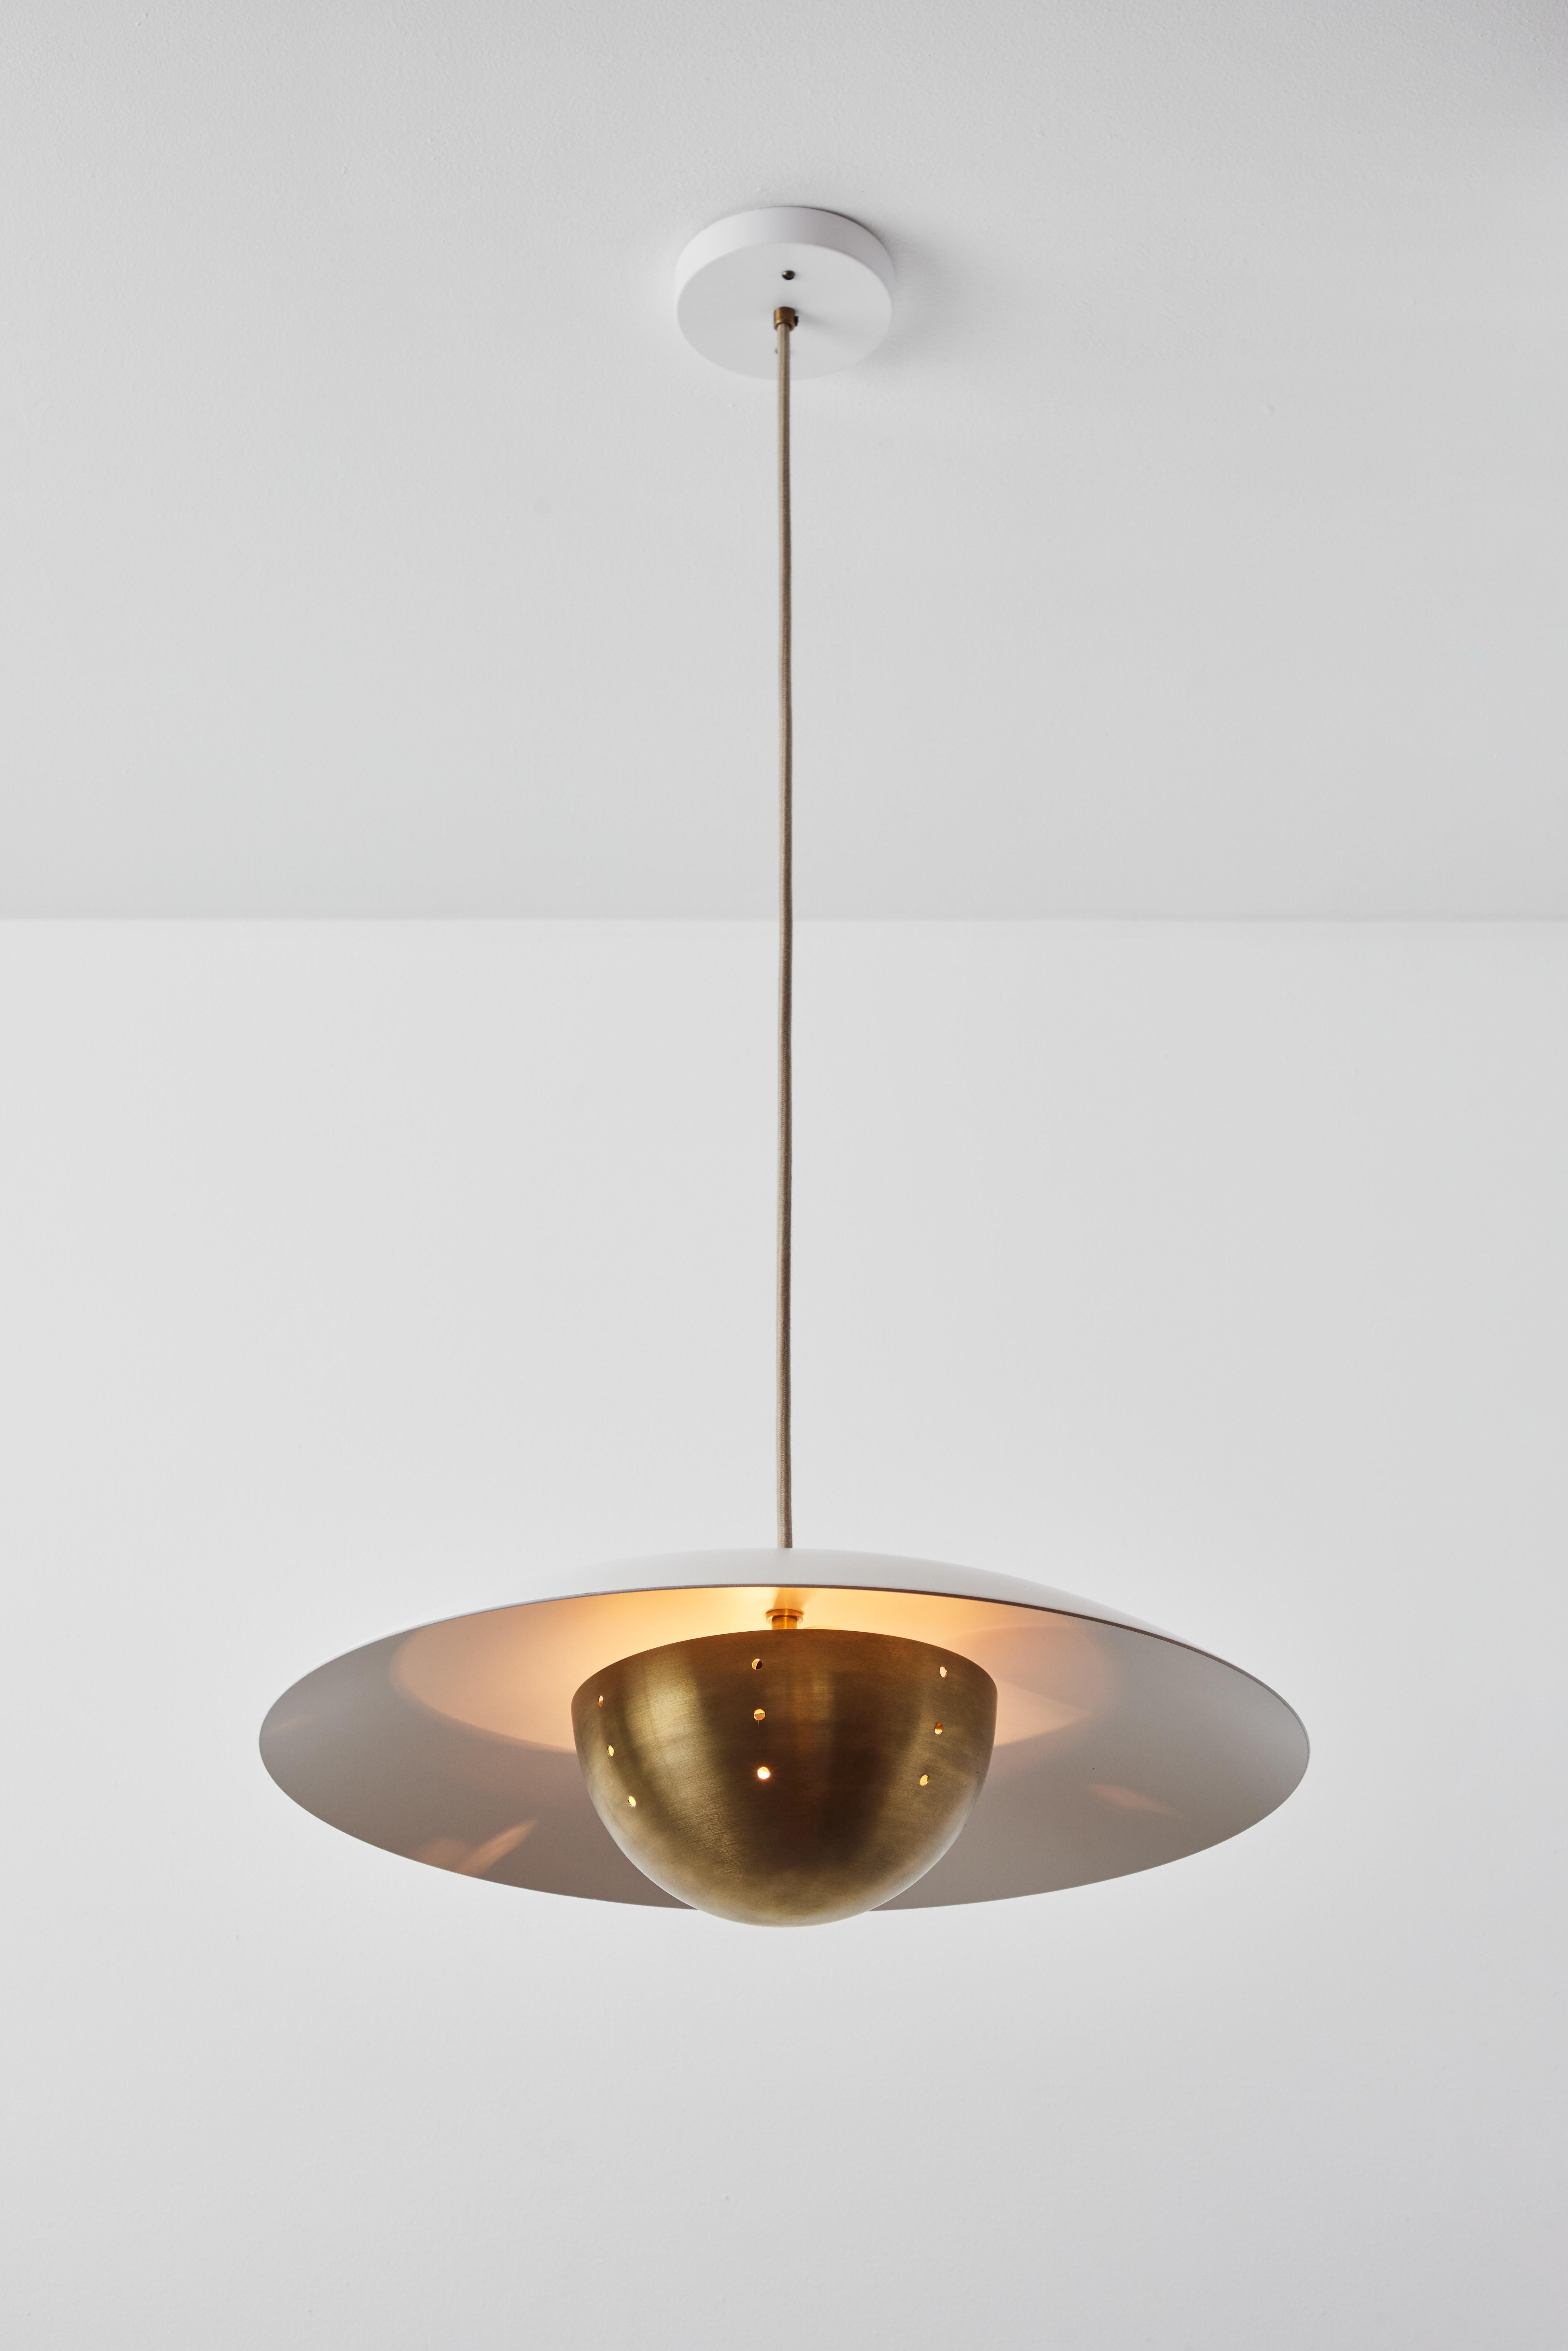 American 'Gabi' Perforated Brass Dome & White Painted Metal Pendant by Alvaro Benitez For Sale